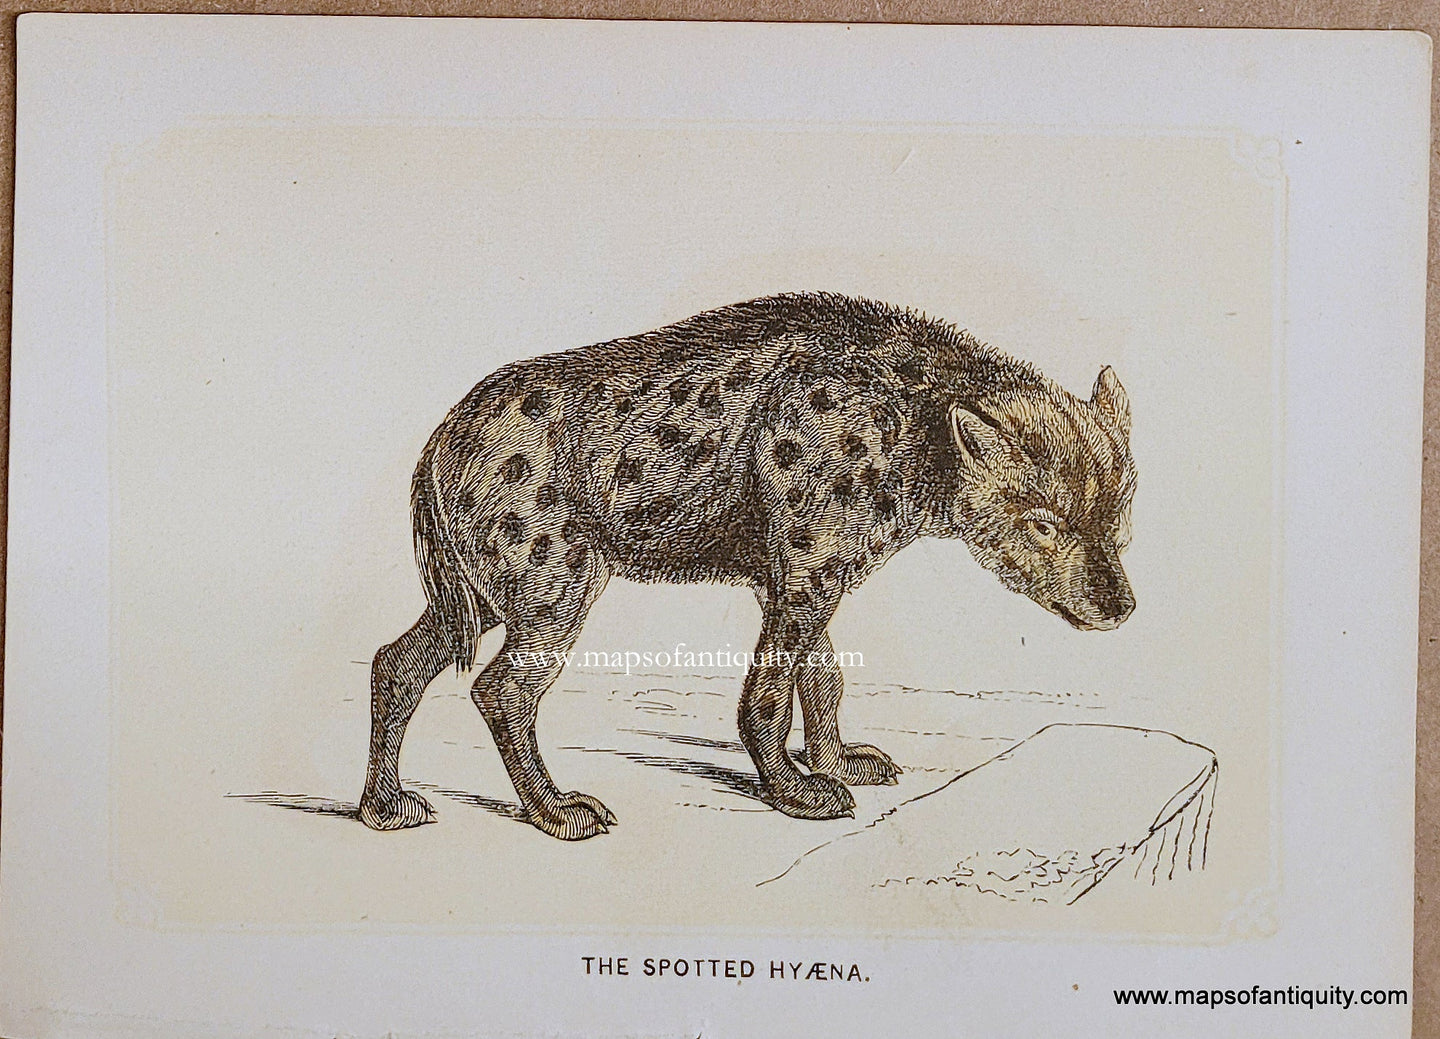 Genuine-Antique-Print-The-Spotted-Hyaena-1850s-Tallis-Maps-Of-Antiquity